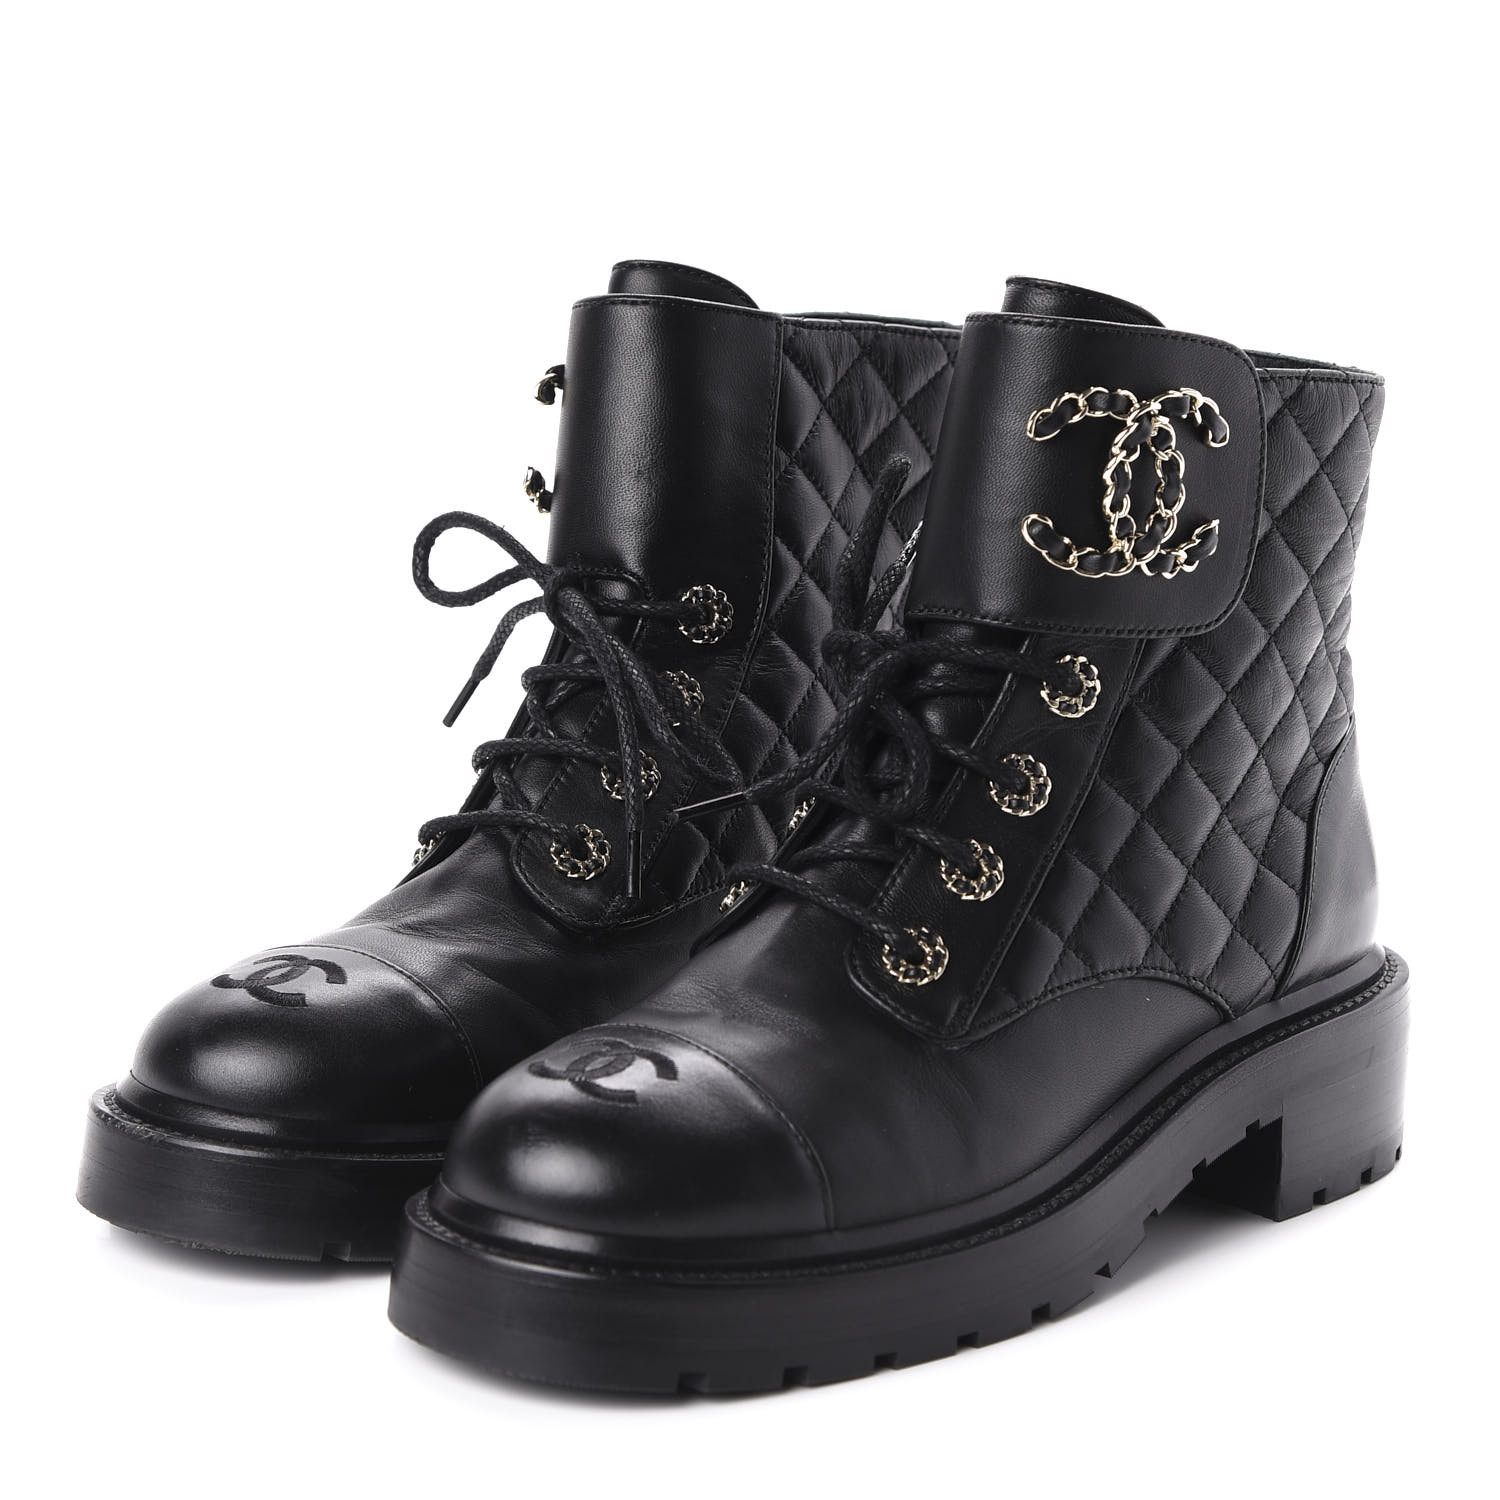 CHANEL Shiny Goatskin Calfskin Quilted Lace Up Combat Boots 37.5 Black ...